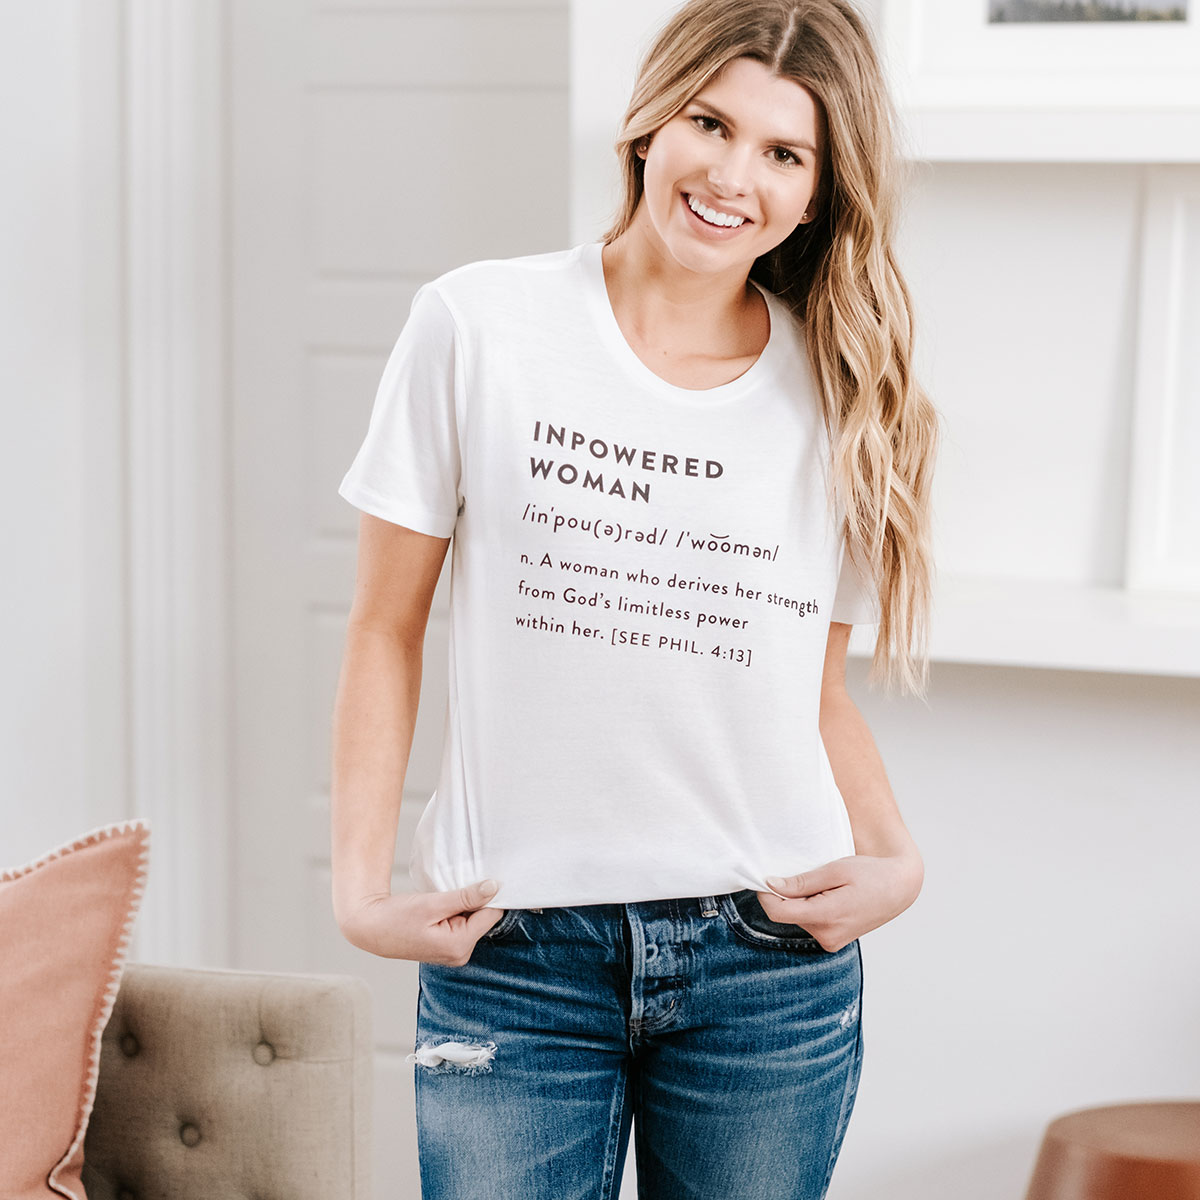 Candace Cameron Bure - Inpowered Woman - Relaxed Fit T-Shirt